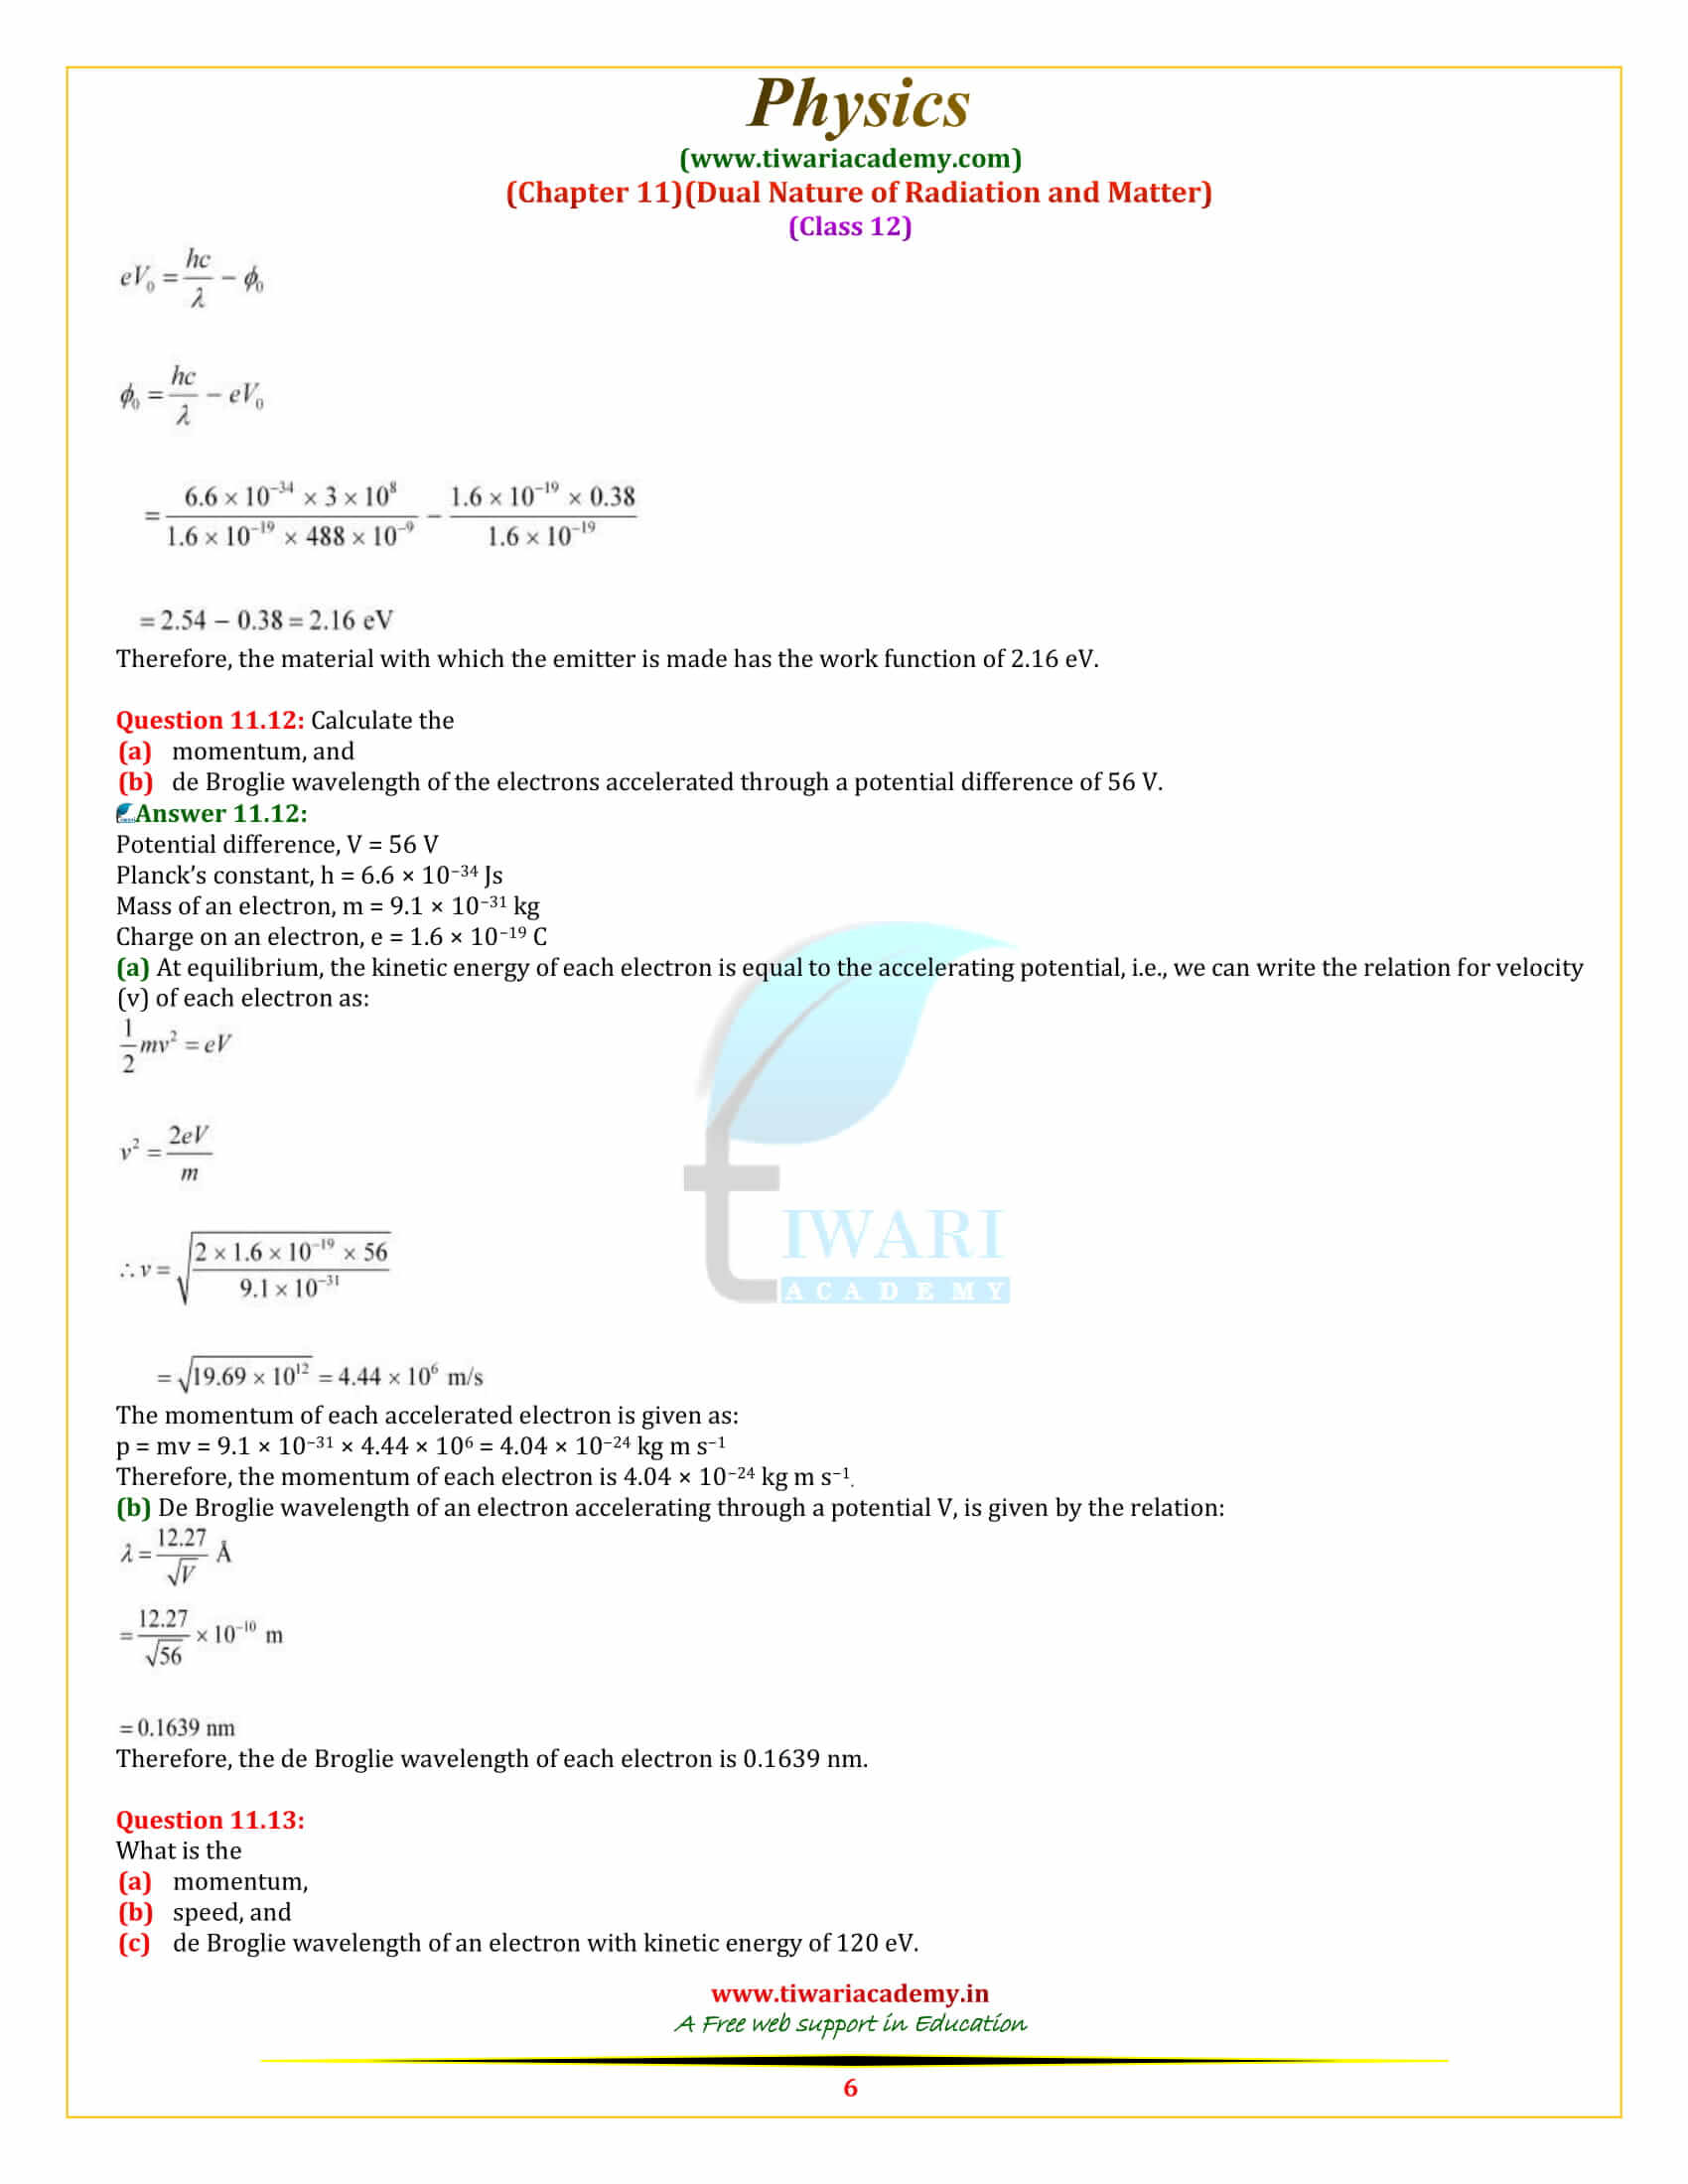 NCERT Solutions for Class 12 Physics Chapter 11 Dual Nature in pdf form